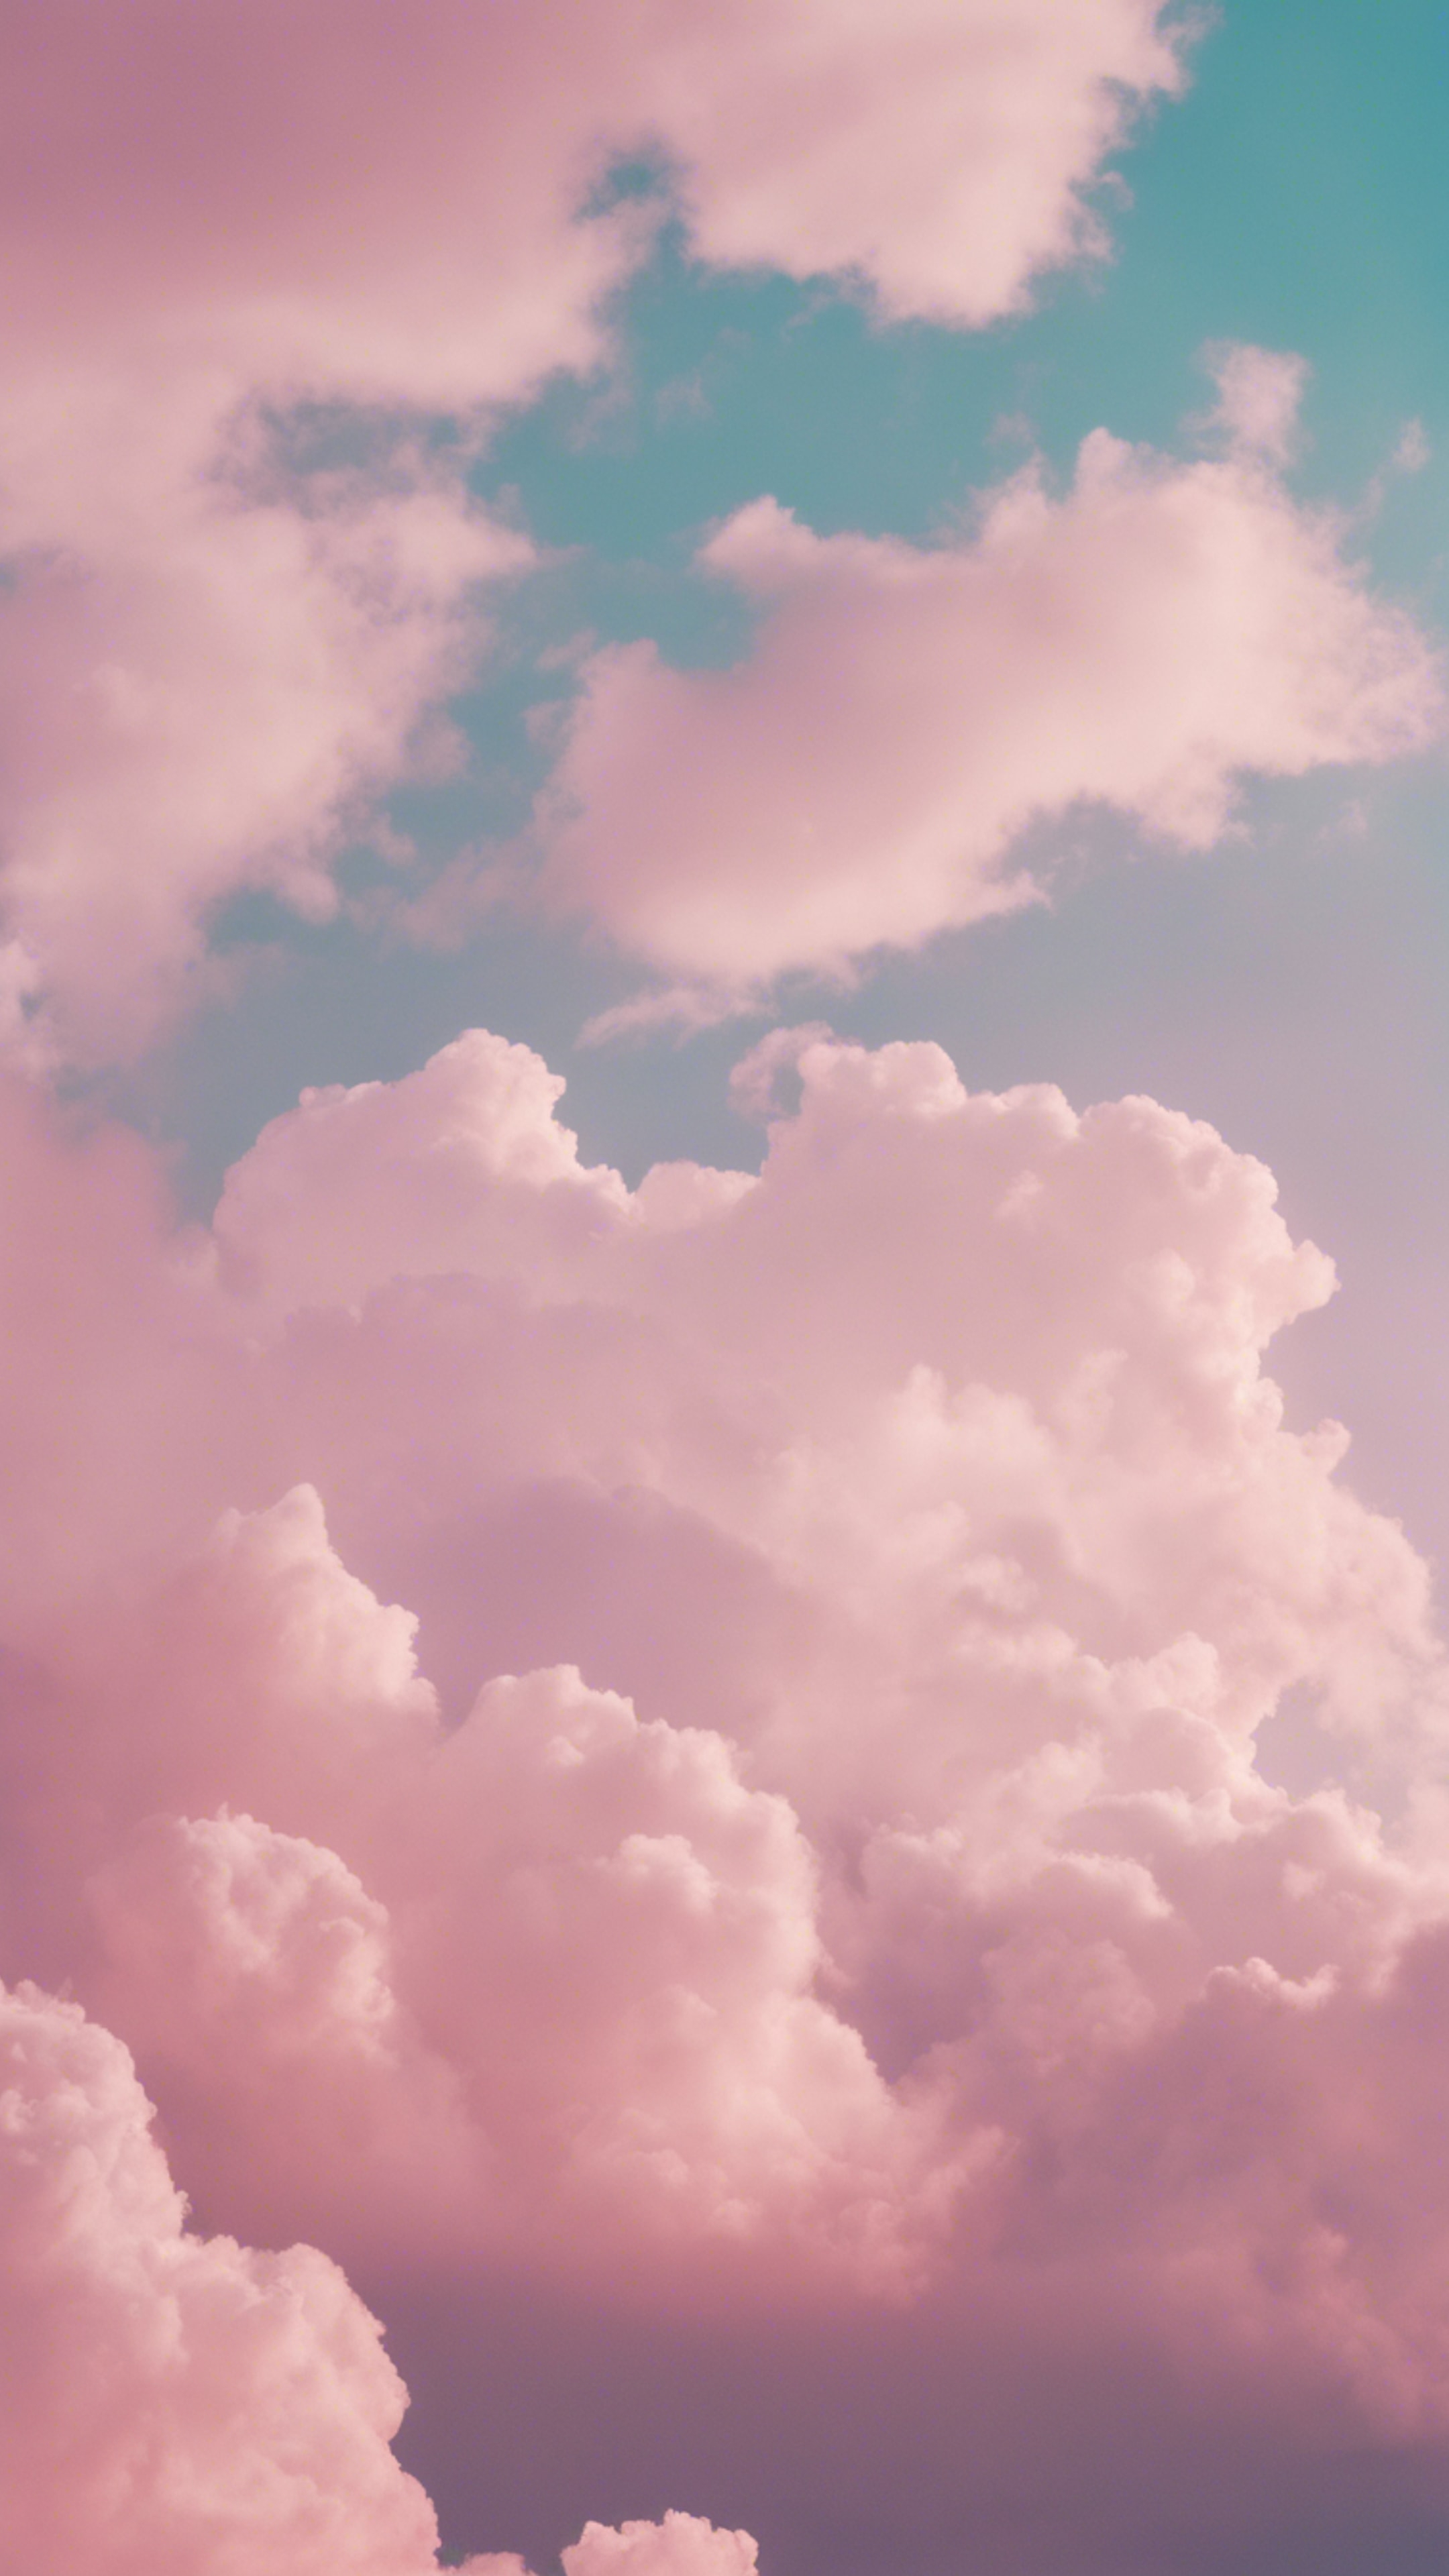 A surreal sky with a mix of pastel tones influenced by Y2K digital aesthetic. Taustakuva[d53cf796167a434cb2de]